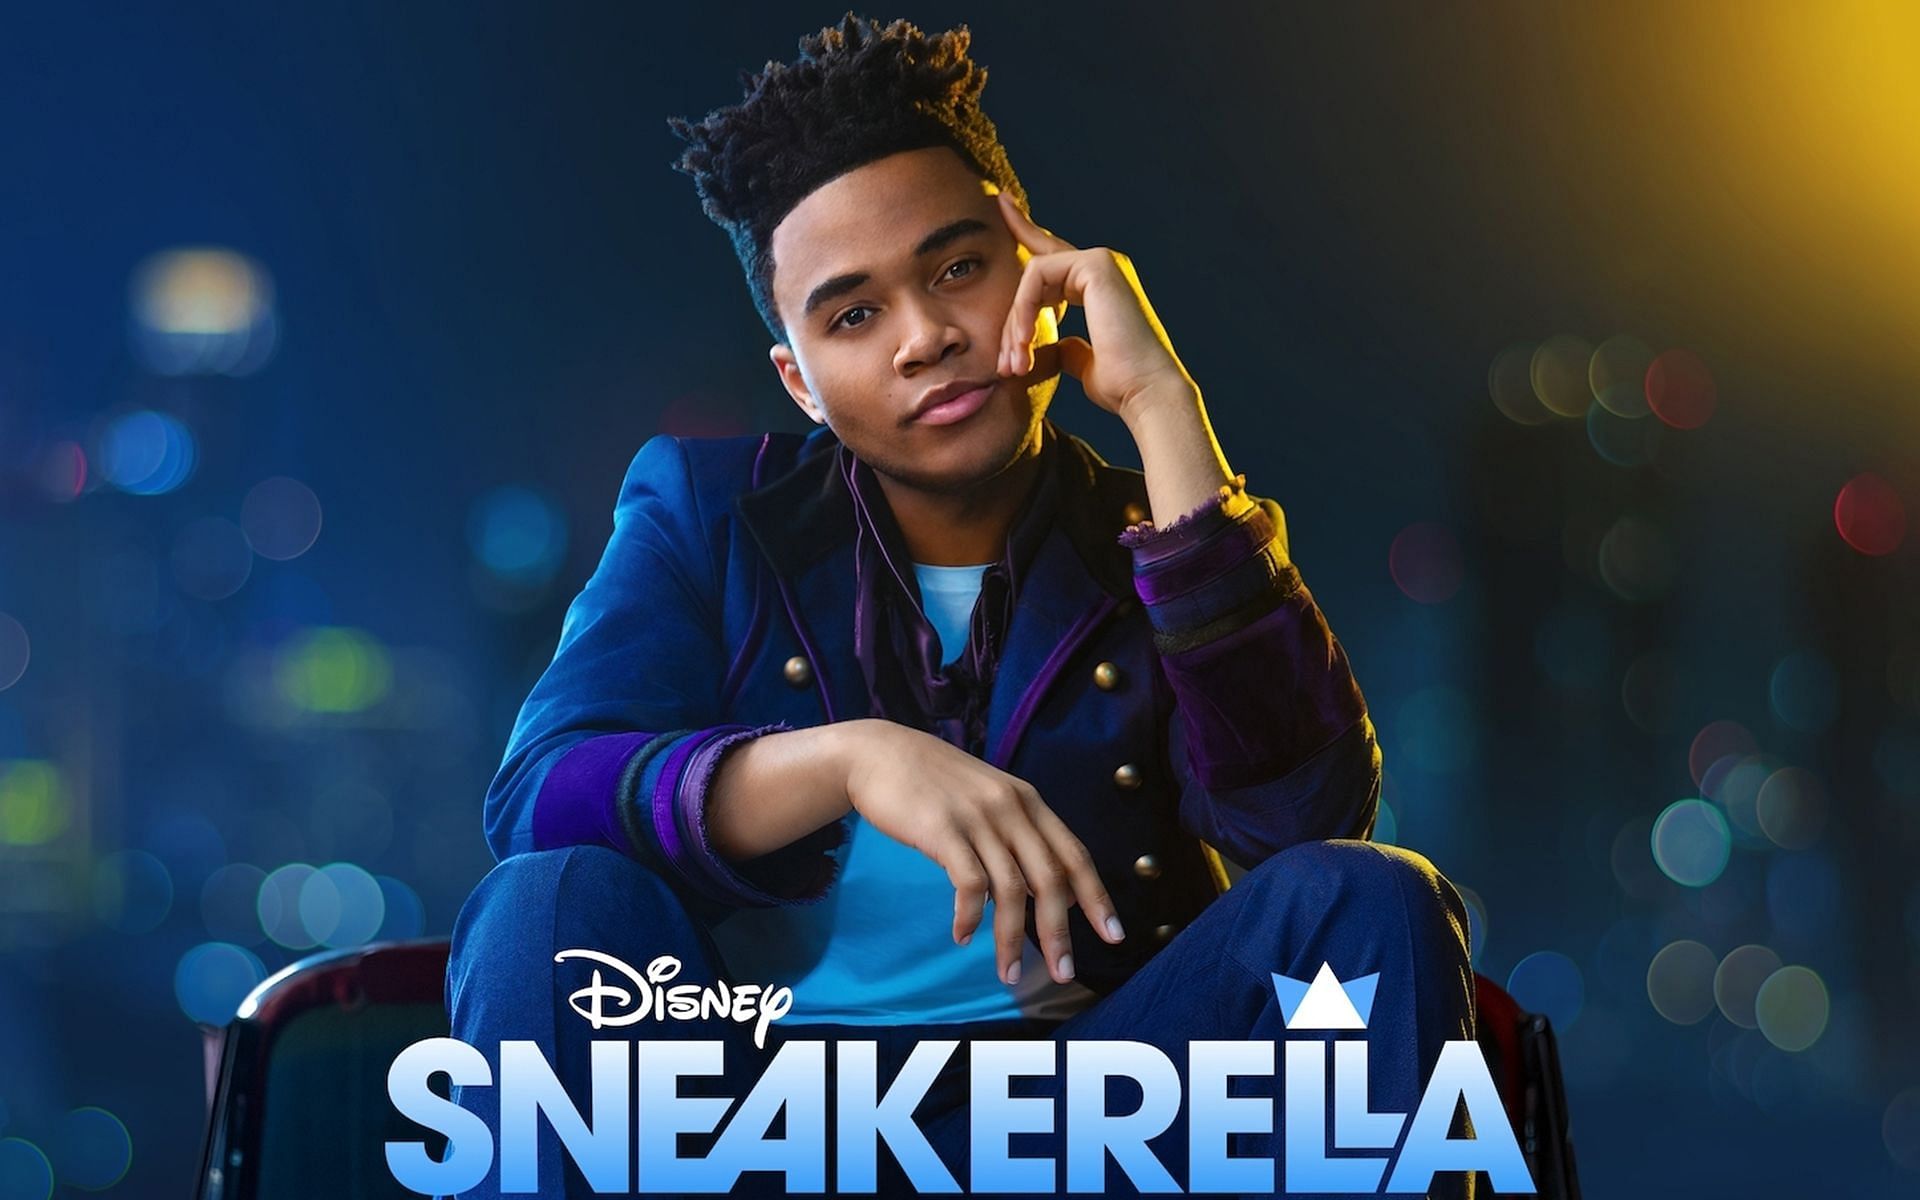 Sneakerella will premiere exclusively on Disney+ this Friday, May 13, 2022, at 3:00 AM ET. (Image via IMDb)